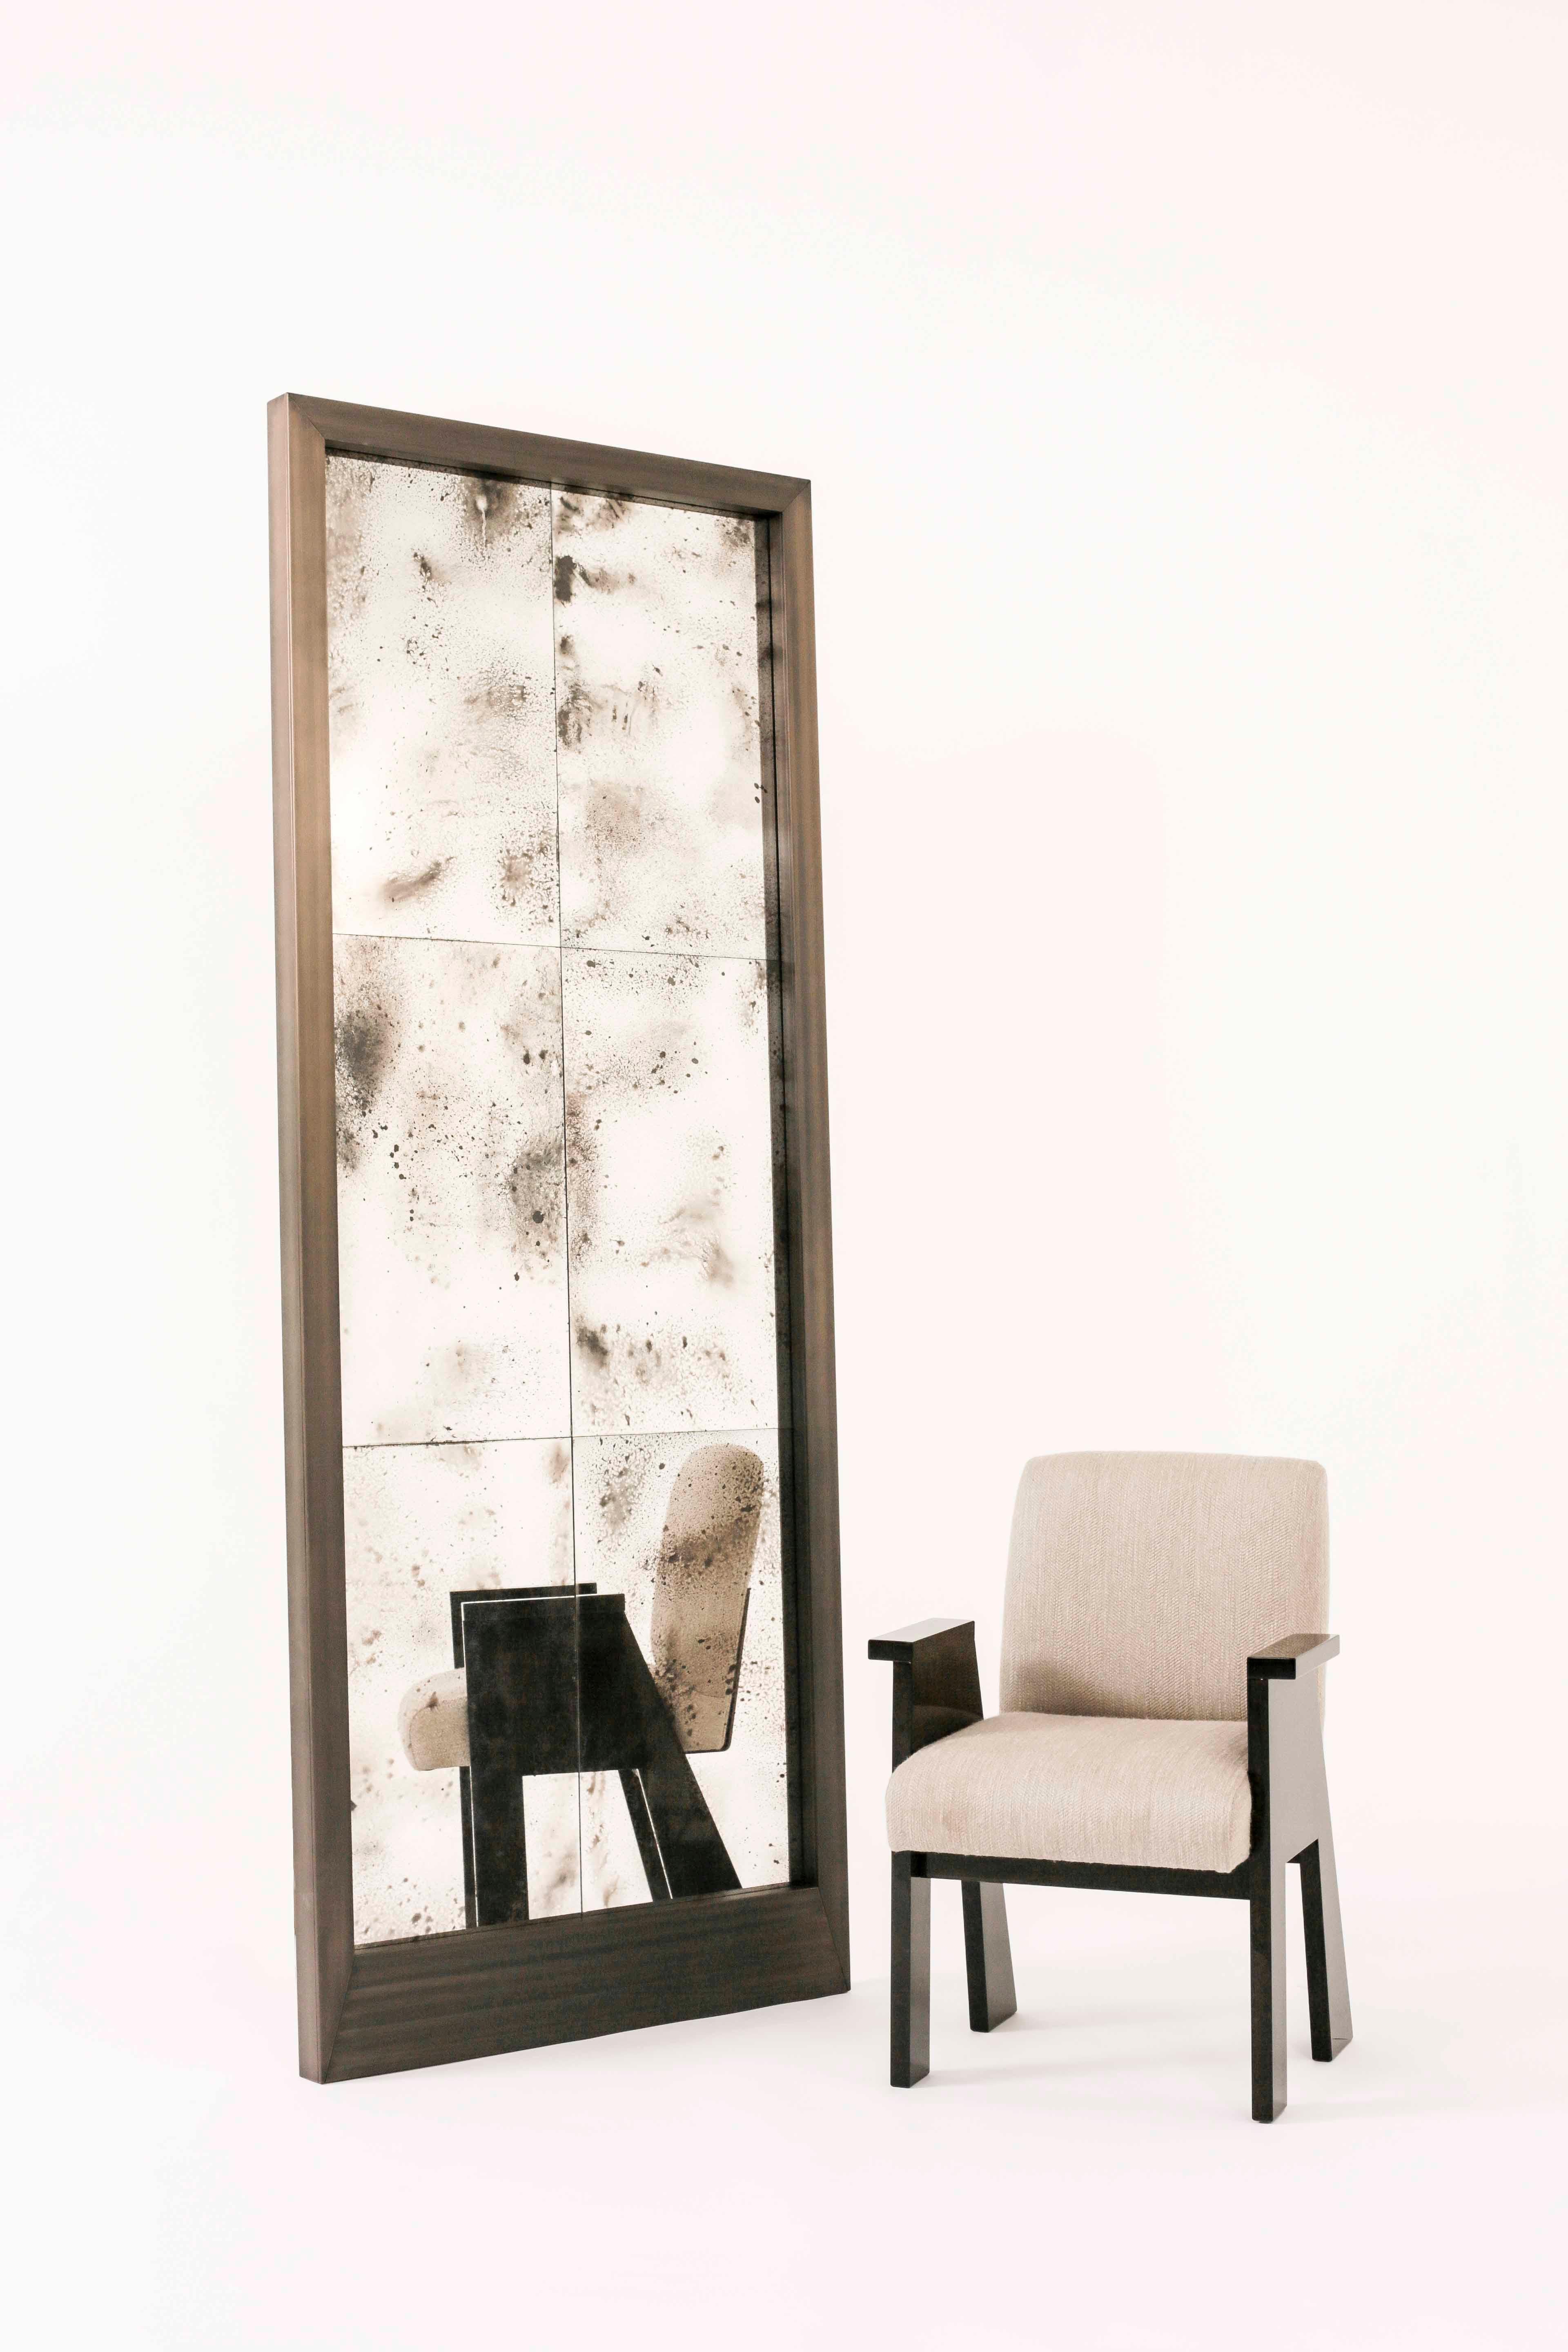 Tapping into a modern mood, the Virtum mirror works a solid brass frame with a clean-lined silhouette. Inspired by the Latin meaning of glass the designs mirrored panels are distinguished by an antique effect – perfect for adding an aged allure to